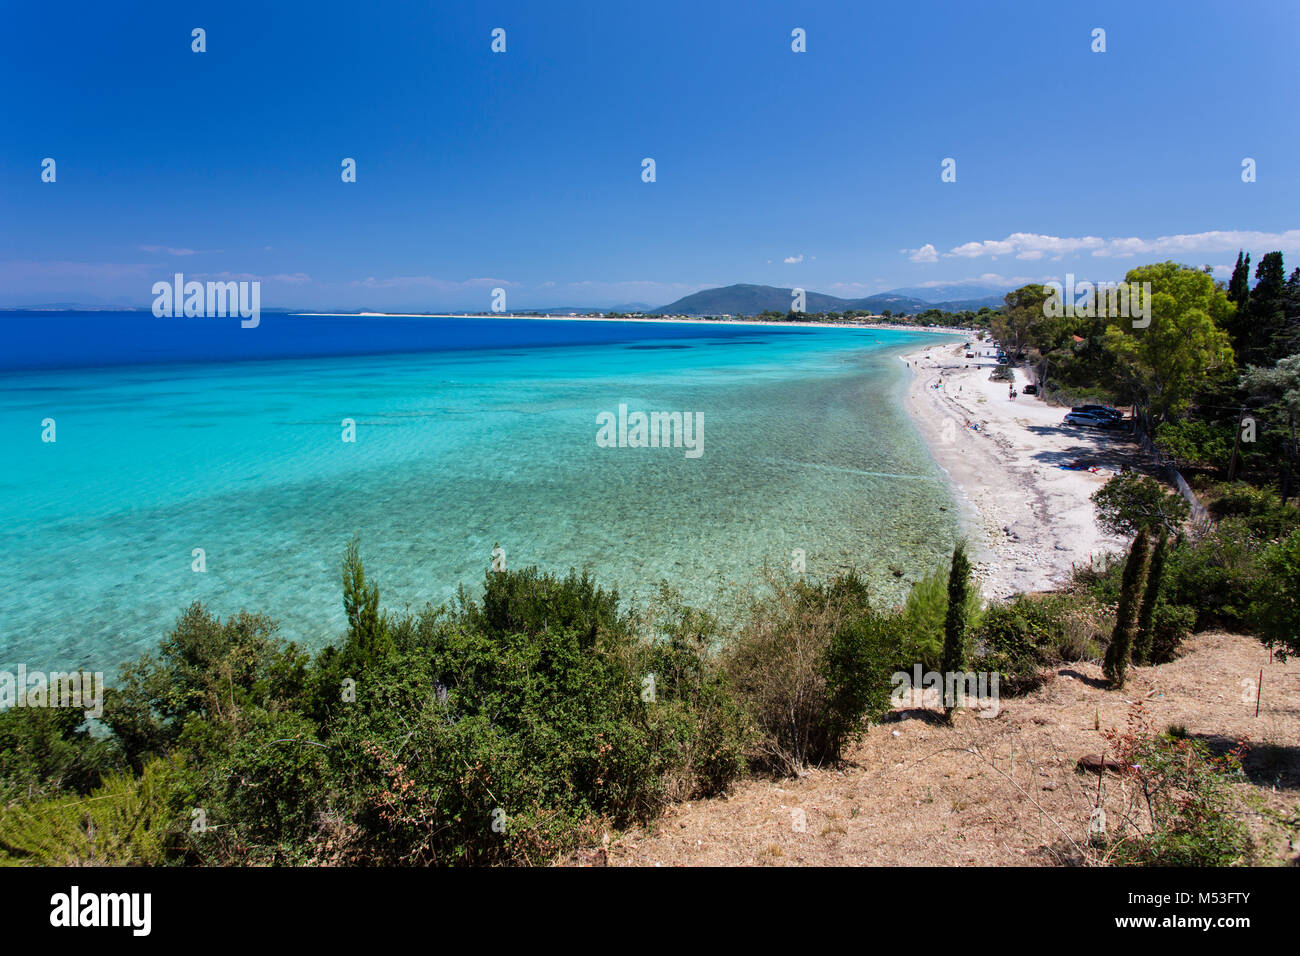 Turquoise waters of Agios Ioannis Beach of Lefkada, Greece, located at the Ionian Sea. Stock Photo